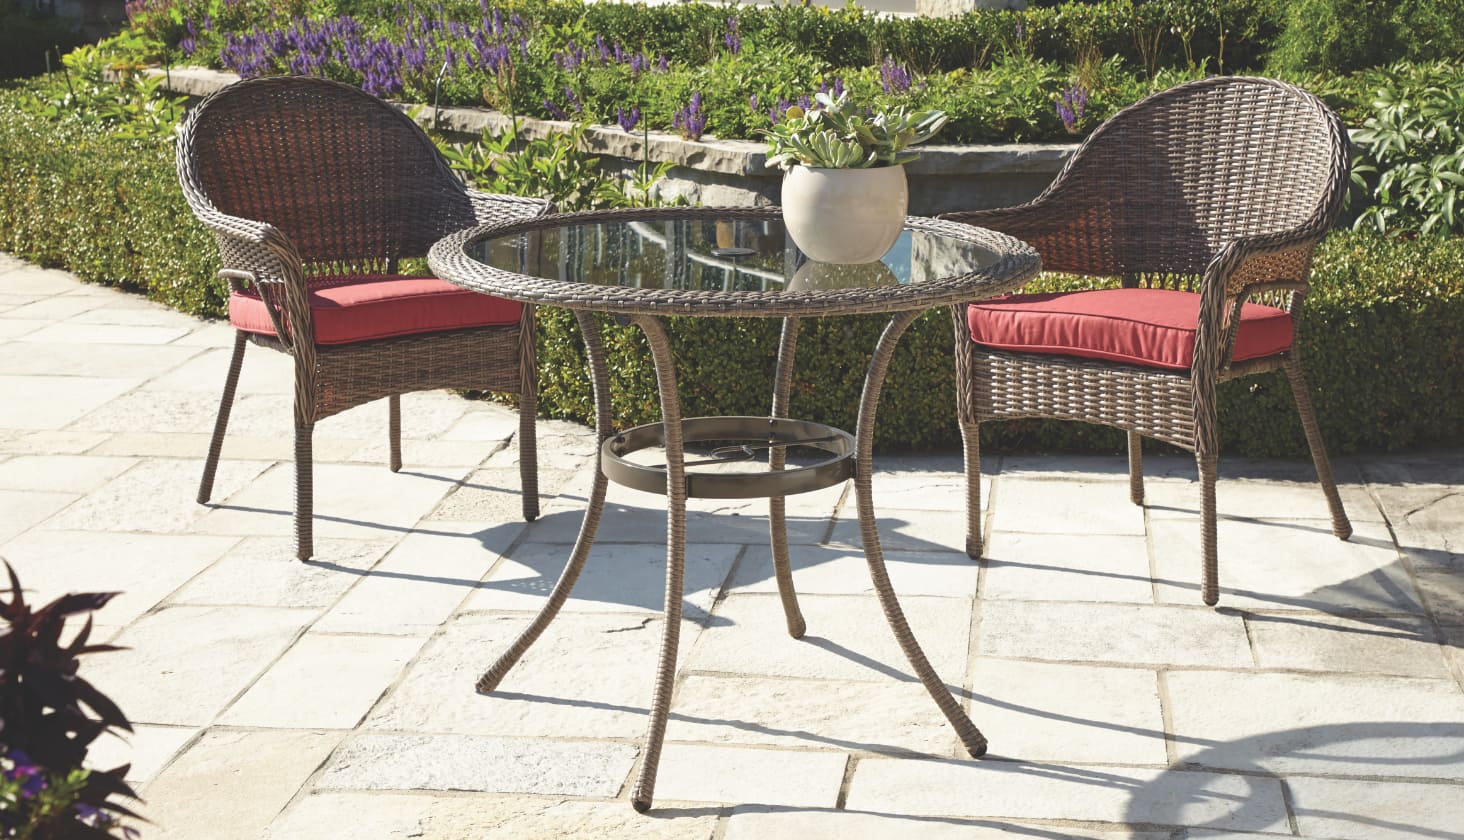 A round wicker outdoor table with a glass pane surface and two patio armchairs surrounding it.